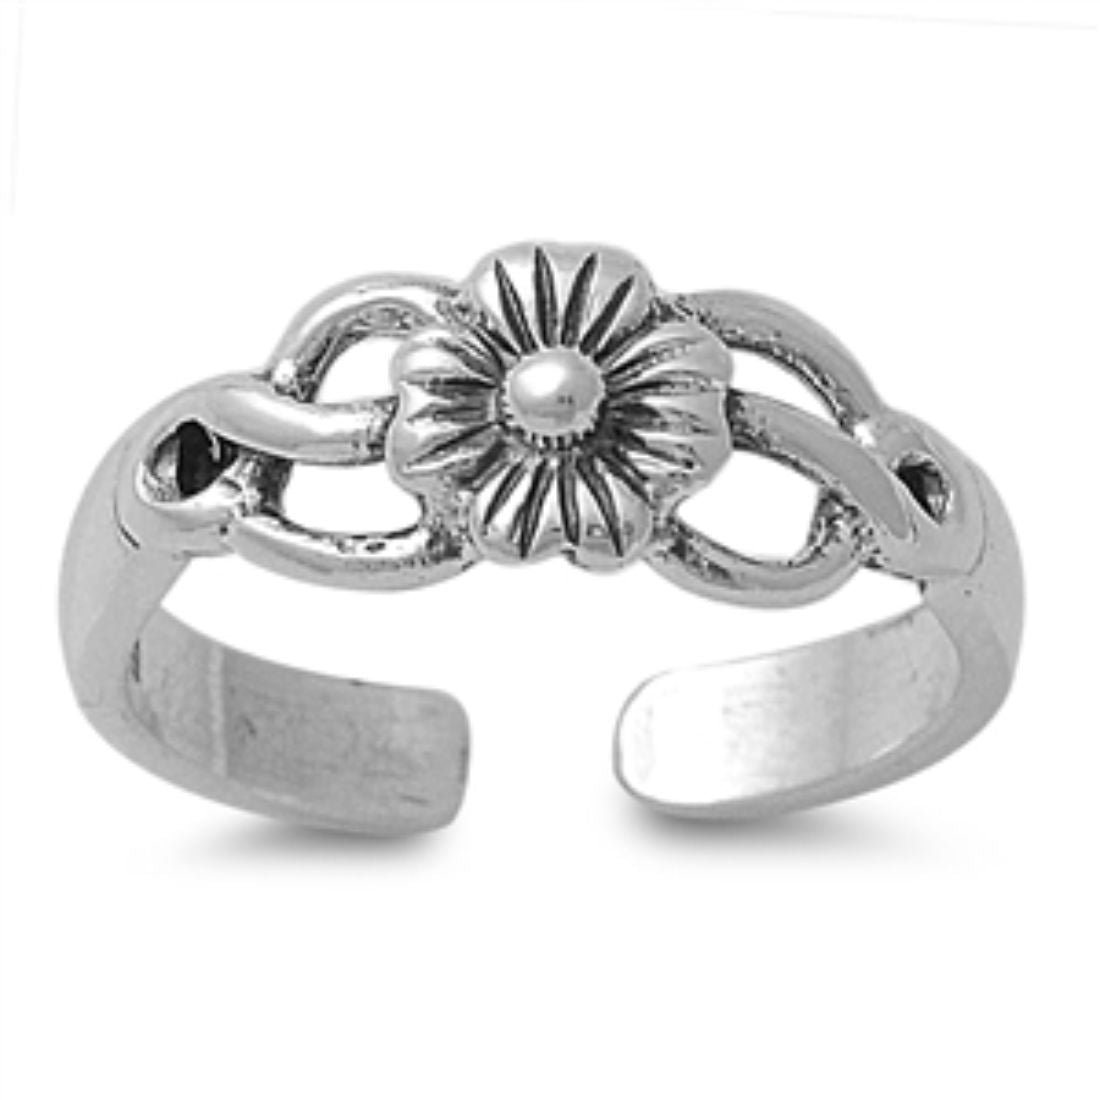 Flower Adjustable Silver Toe Ring Band 925 Sterling Silver (3mm)